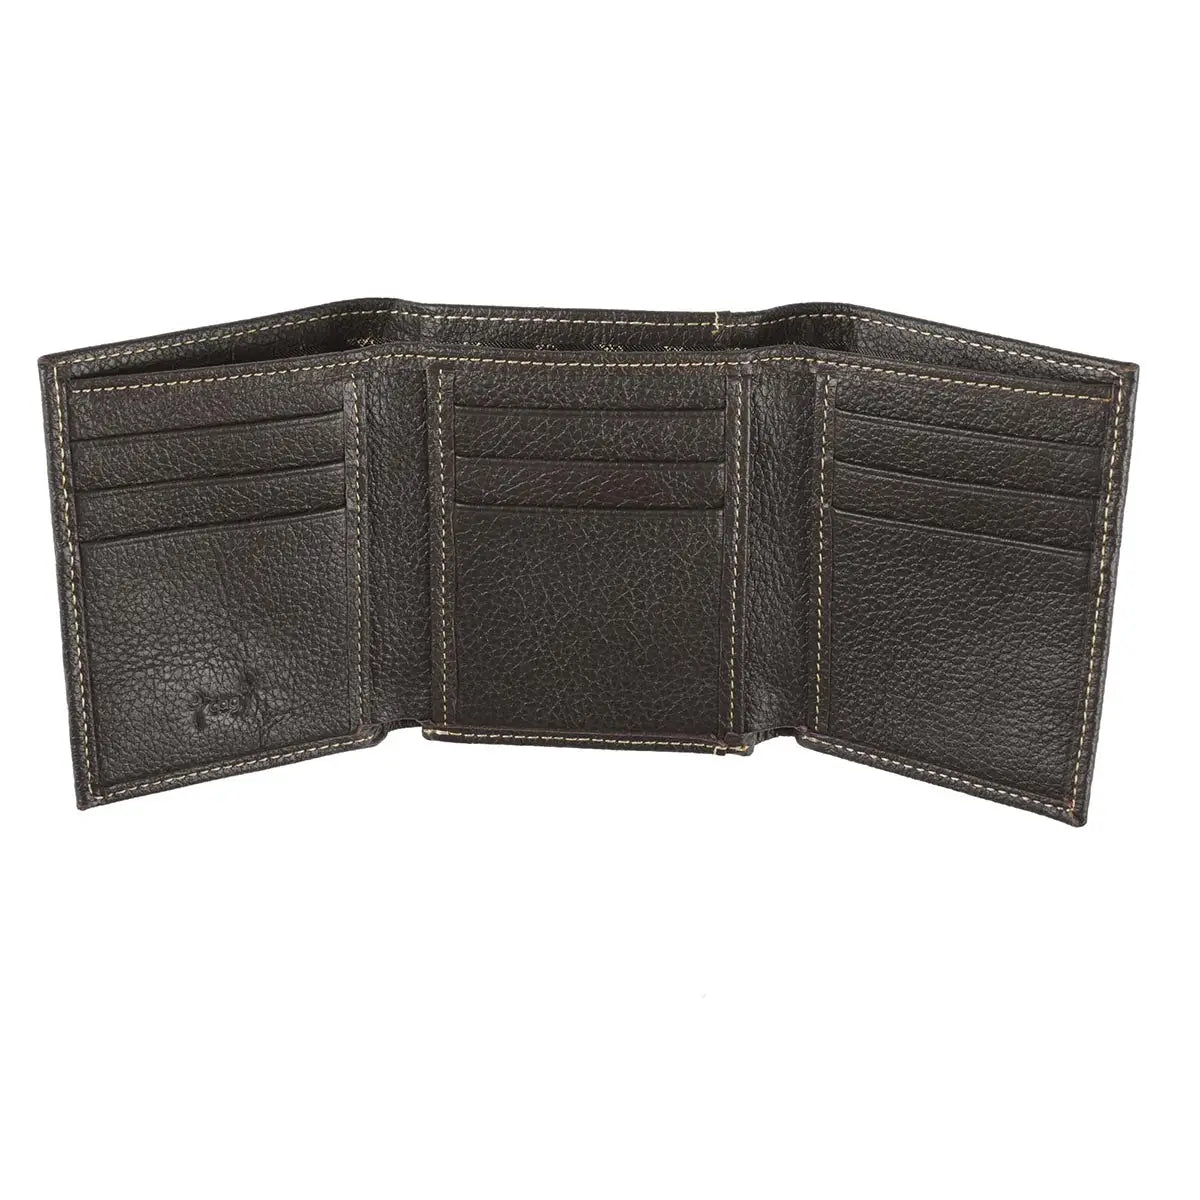 Three Crosses Leather Wallet